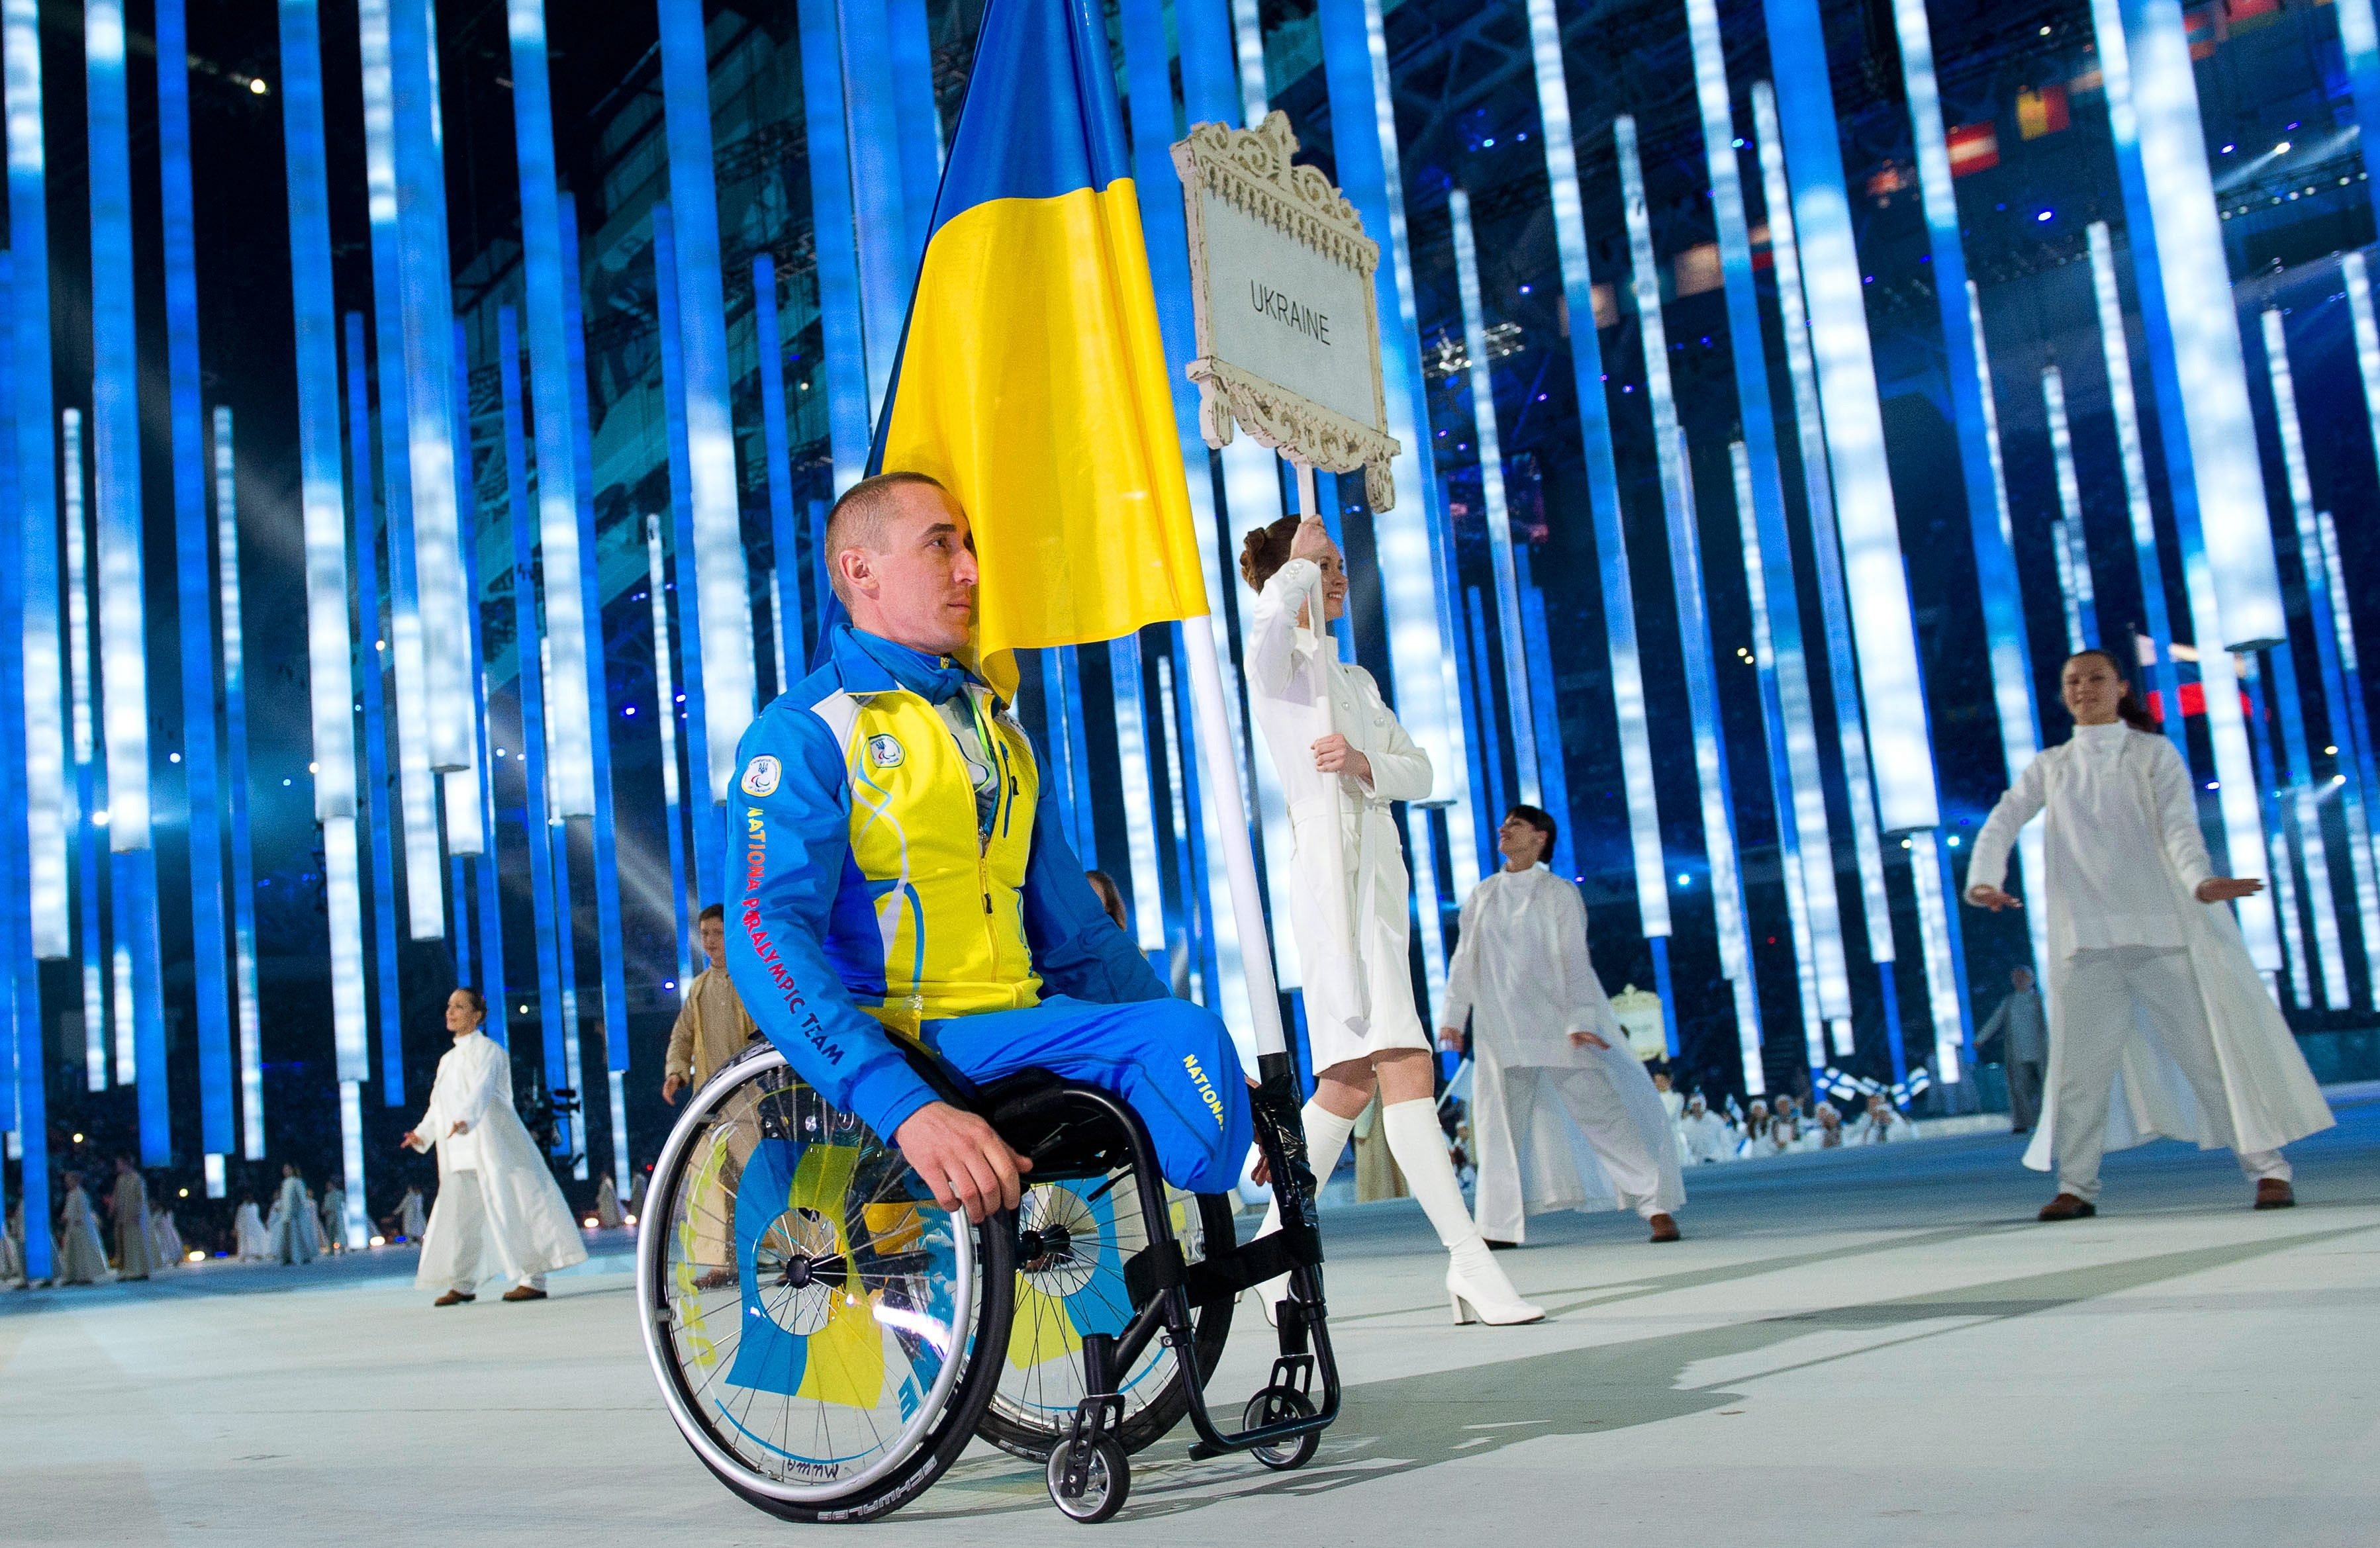 Flag bearer Mykhaylo Tkachenko of Ukraine attends the Opening Ceremony of the Sochi 2014 Winter Paralympic Games at Fisht Olympic Stadium in Sochi, Russia, March 07 2014. (Julian Stratenschulte—EPA)